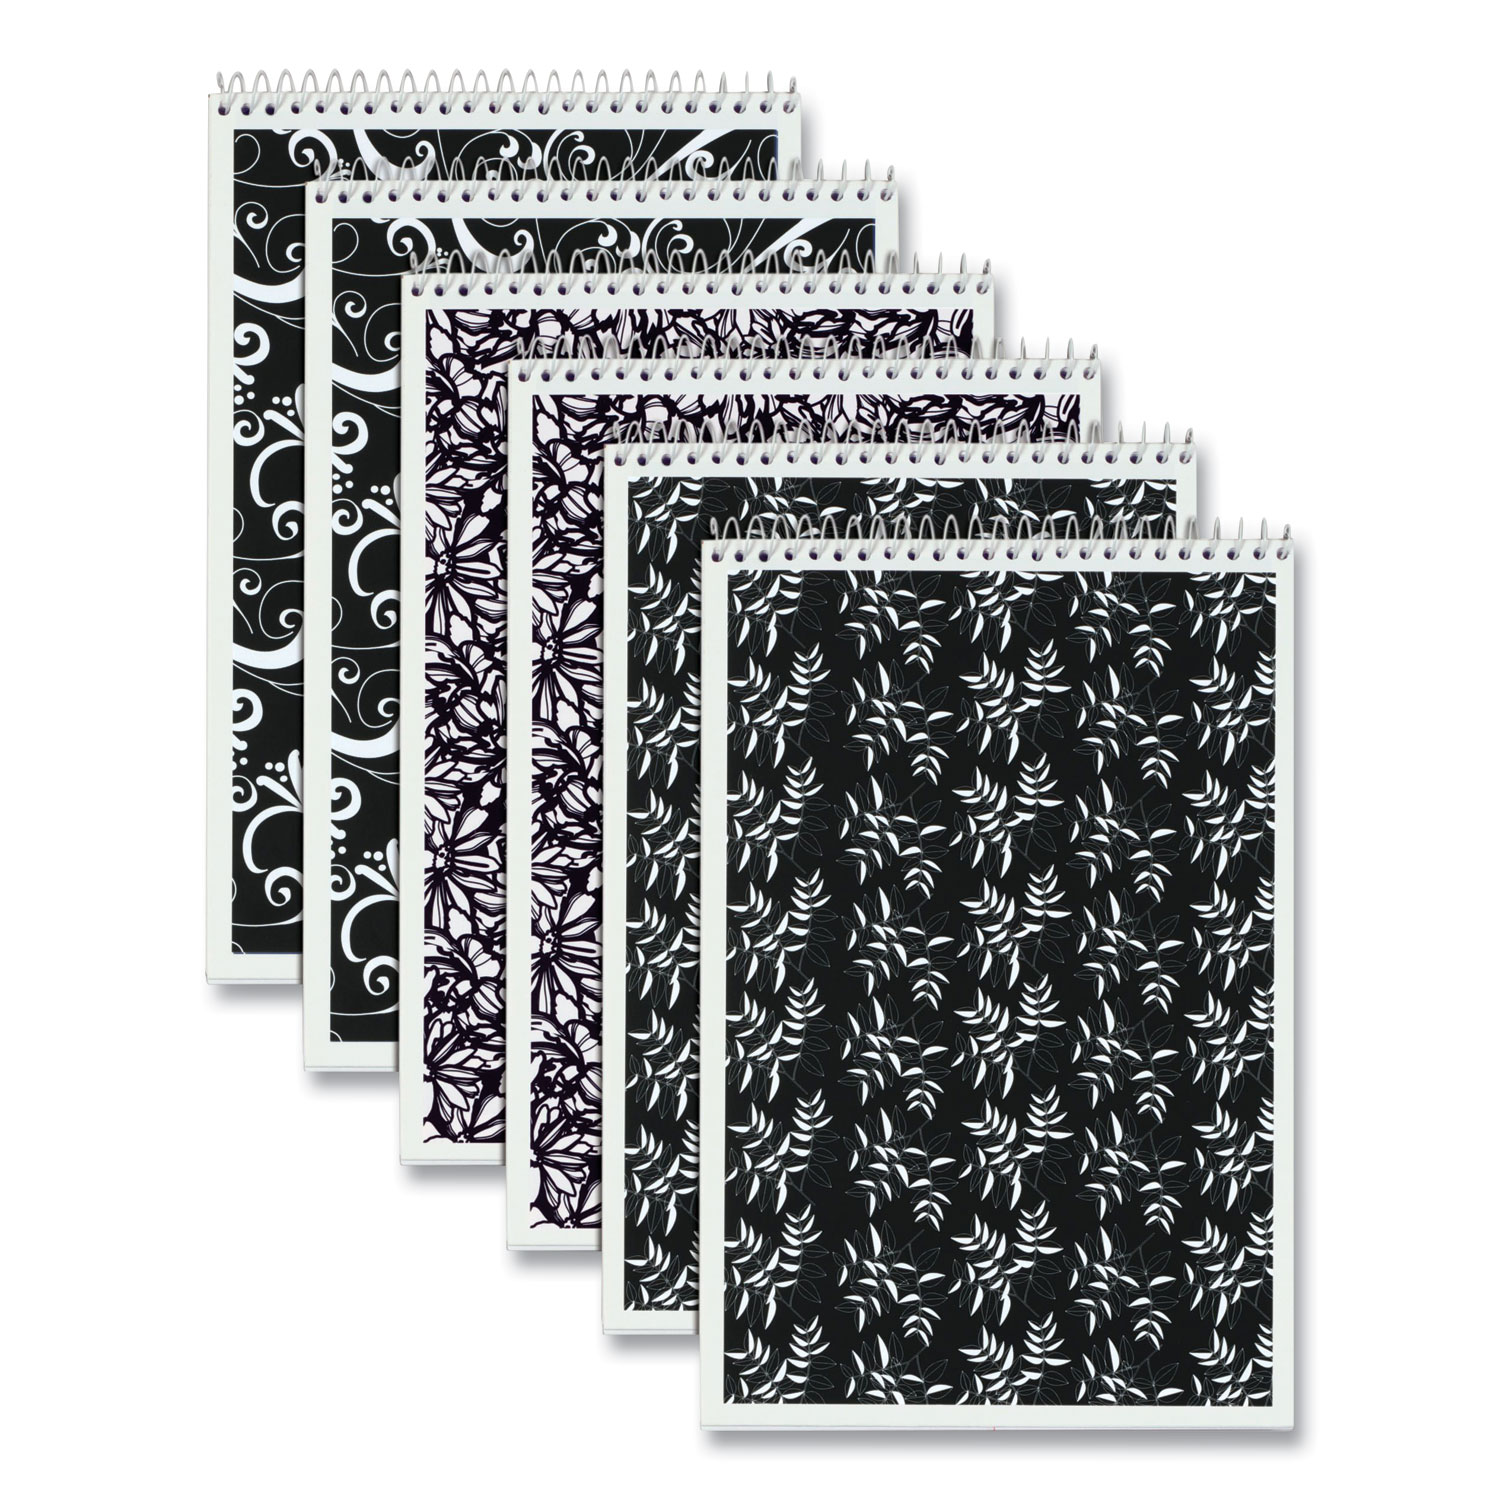 TOPS™ Fashion Steno Book, Gregg Rule, Assorted Black/White Patterned Covers, 6 x 9, 80 White Sheets, 6/Pack